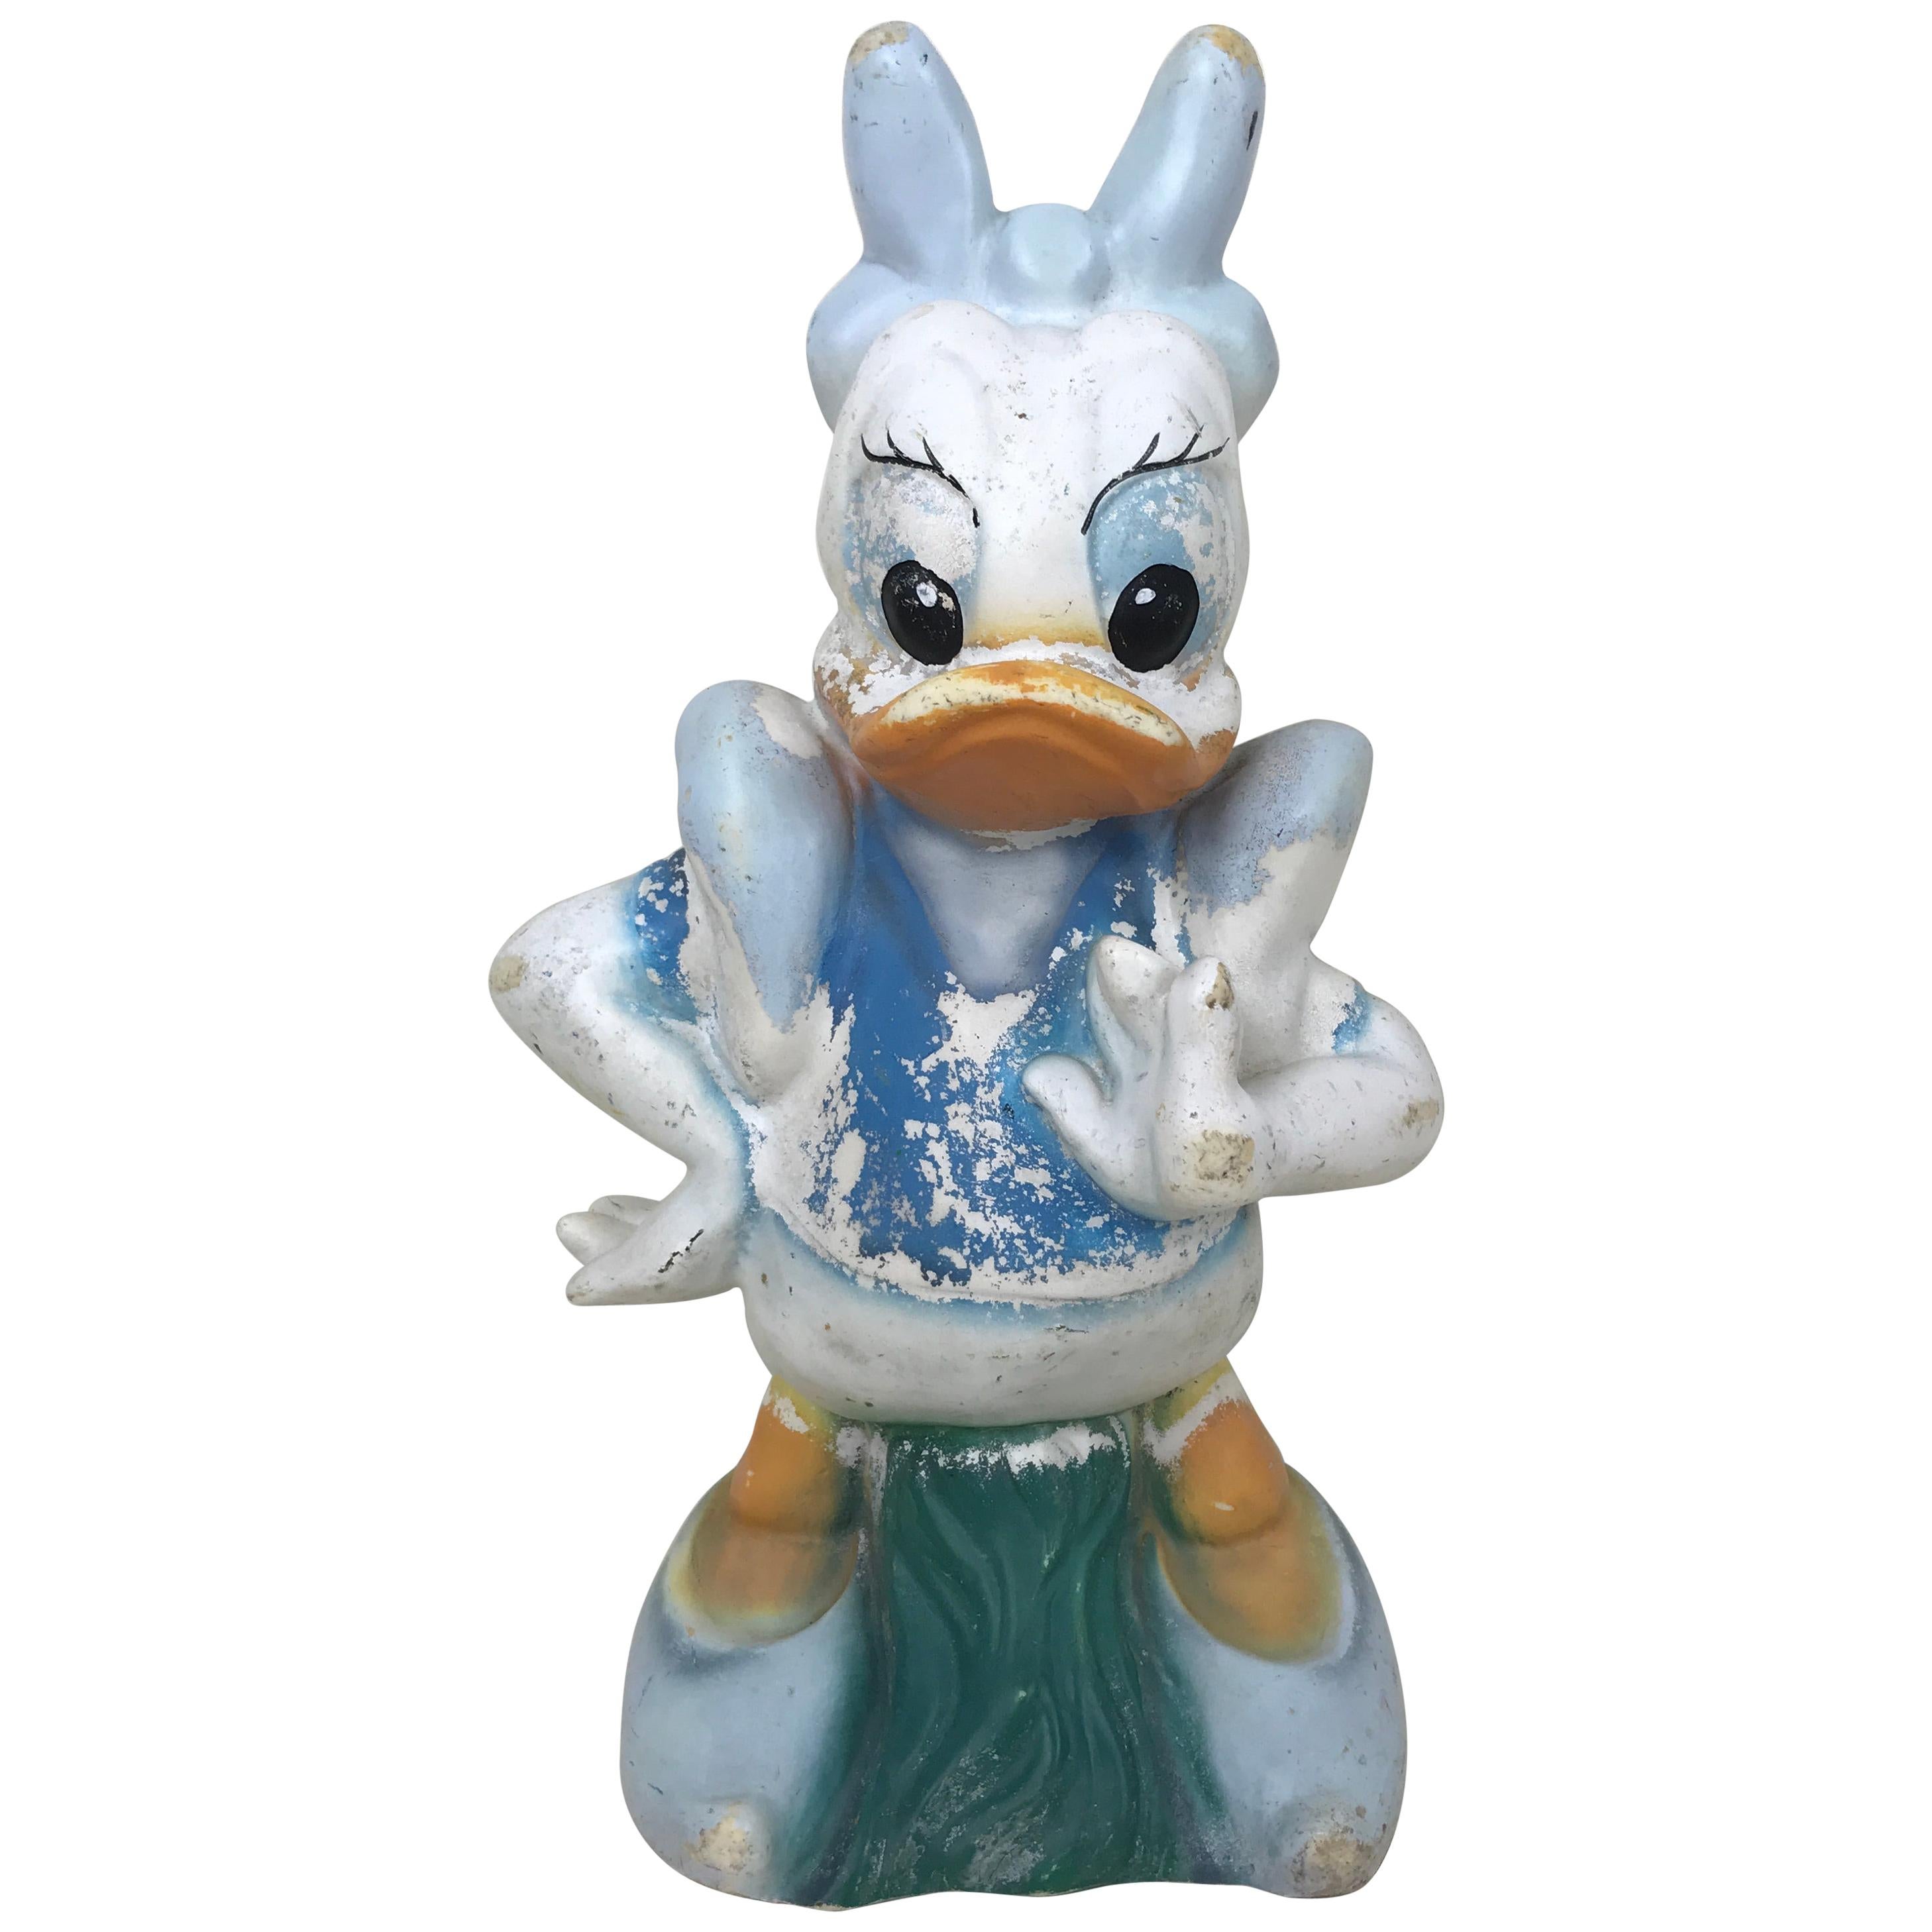 1990s Vintage Disney Daisy Duck Plastic Sculpture Made in Austria by Celloplast For Sale